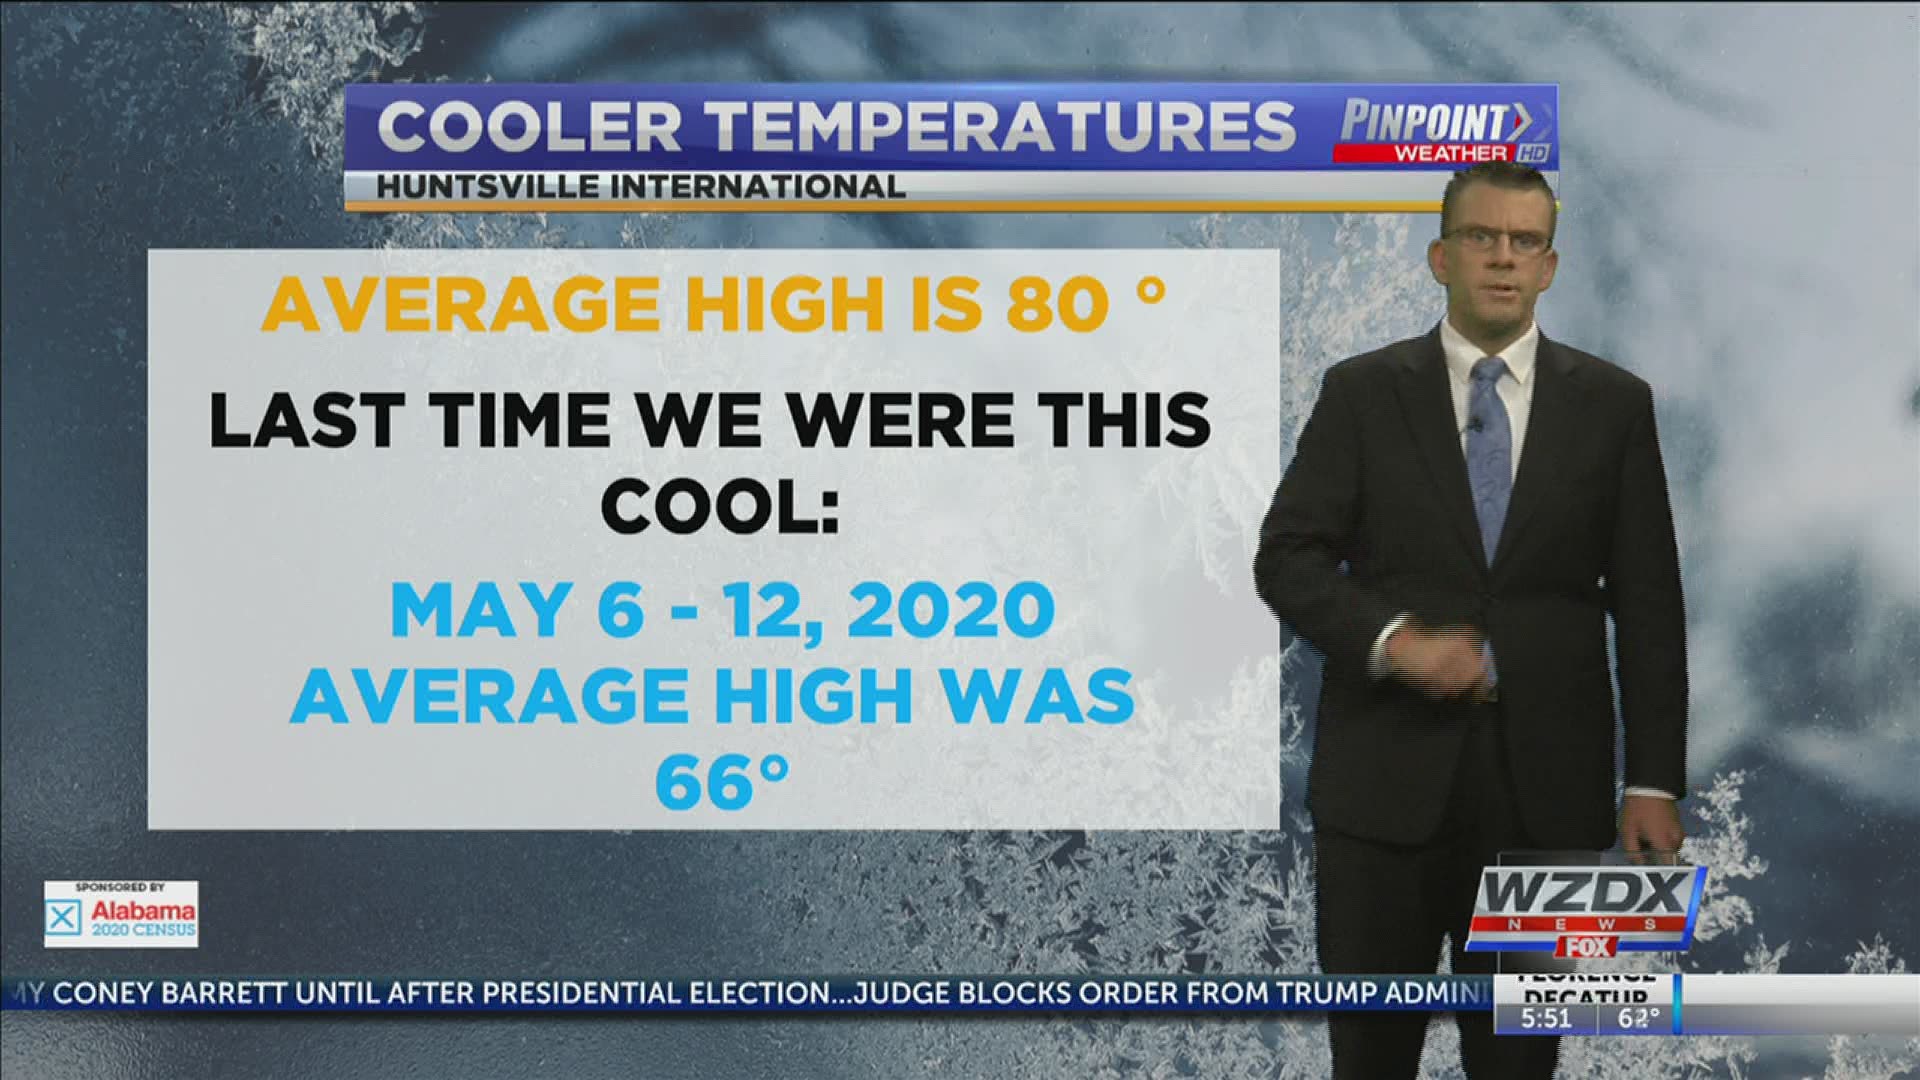 A cool forecast in more ways than one!